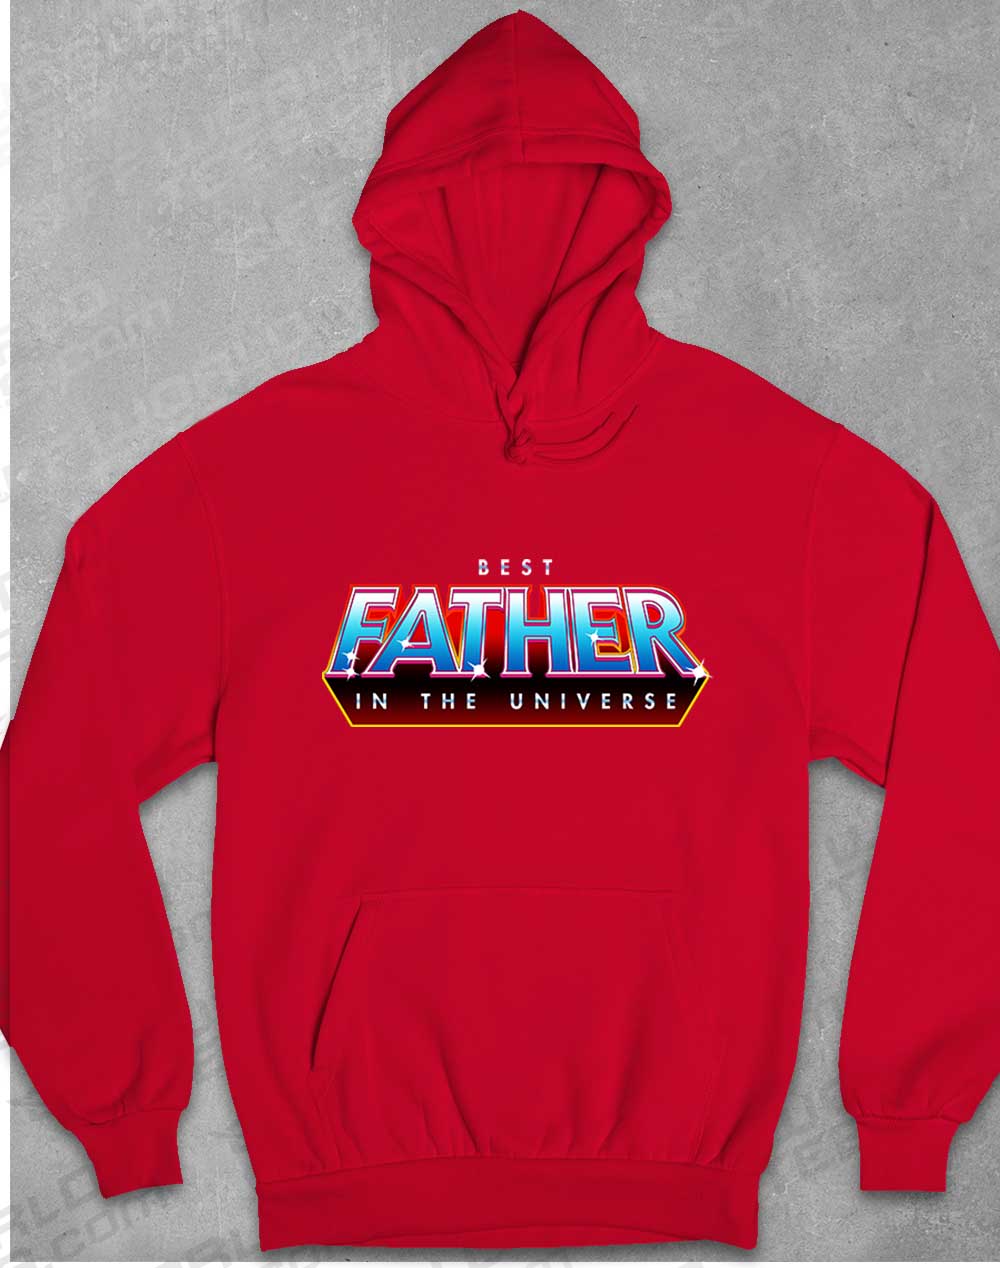 Fire Red - Best Father in the Universe Hoodie